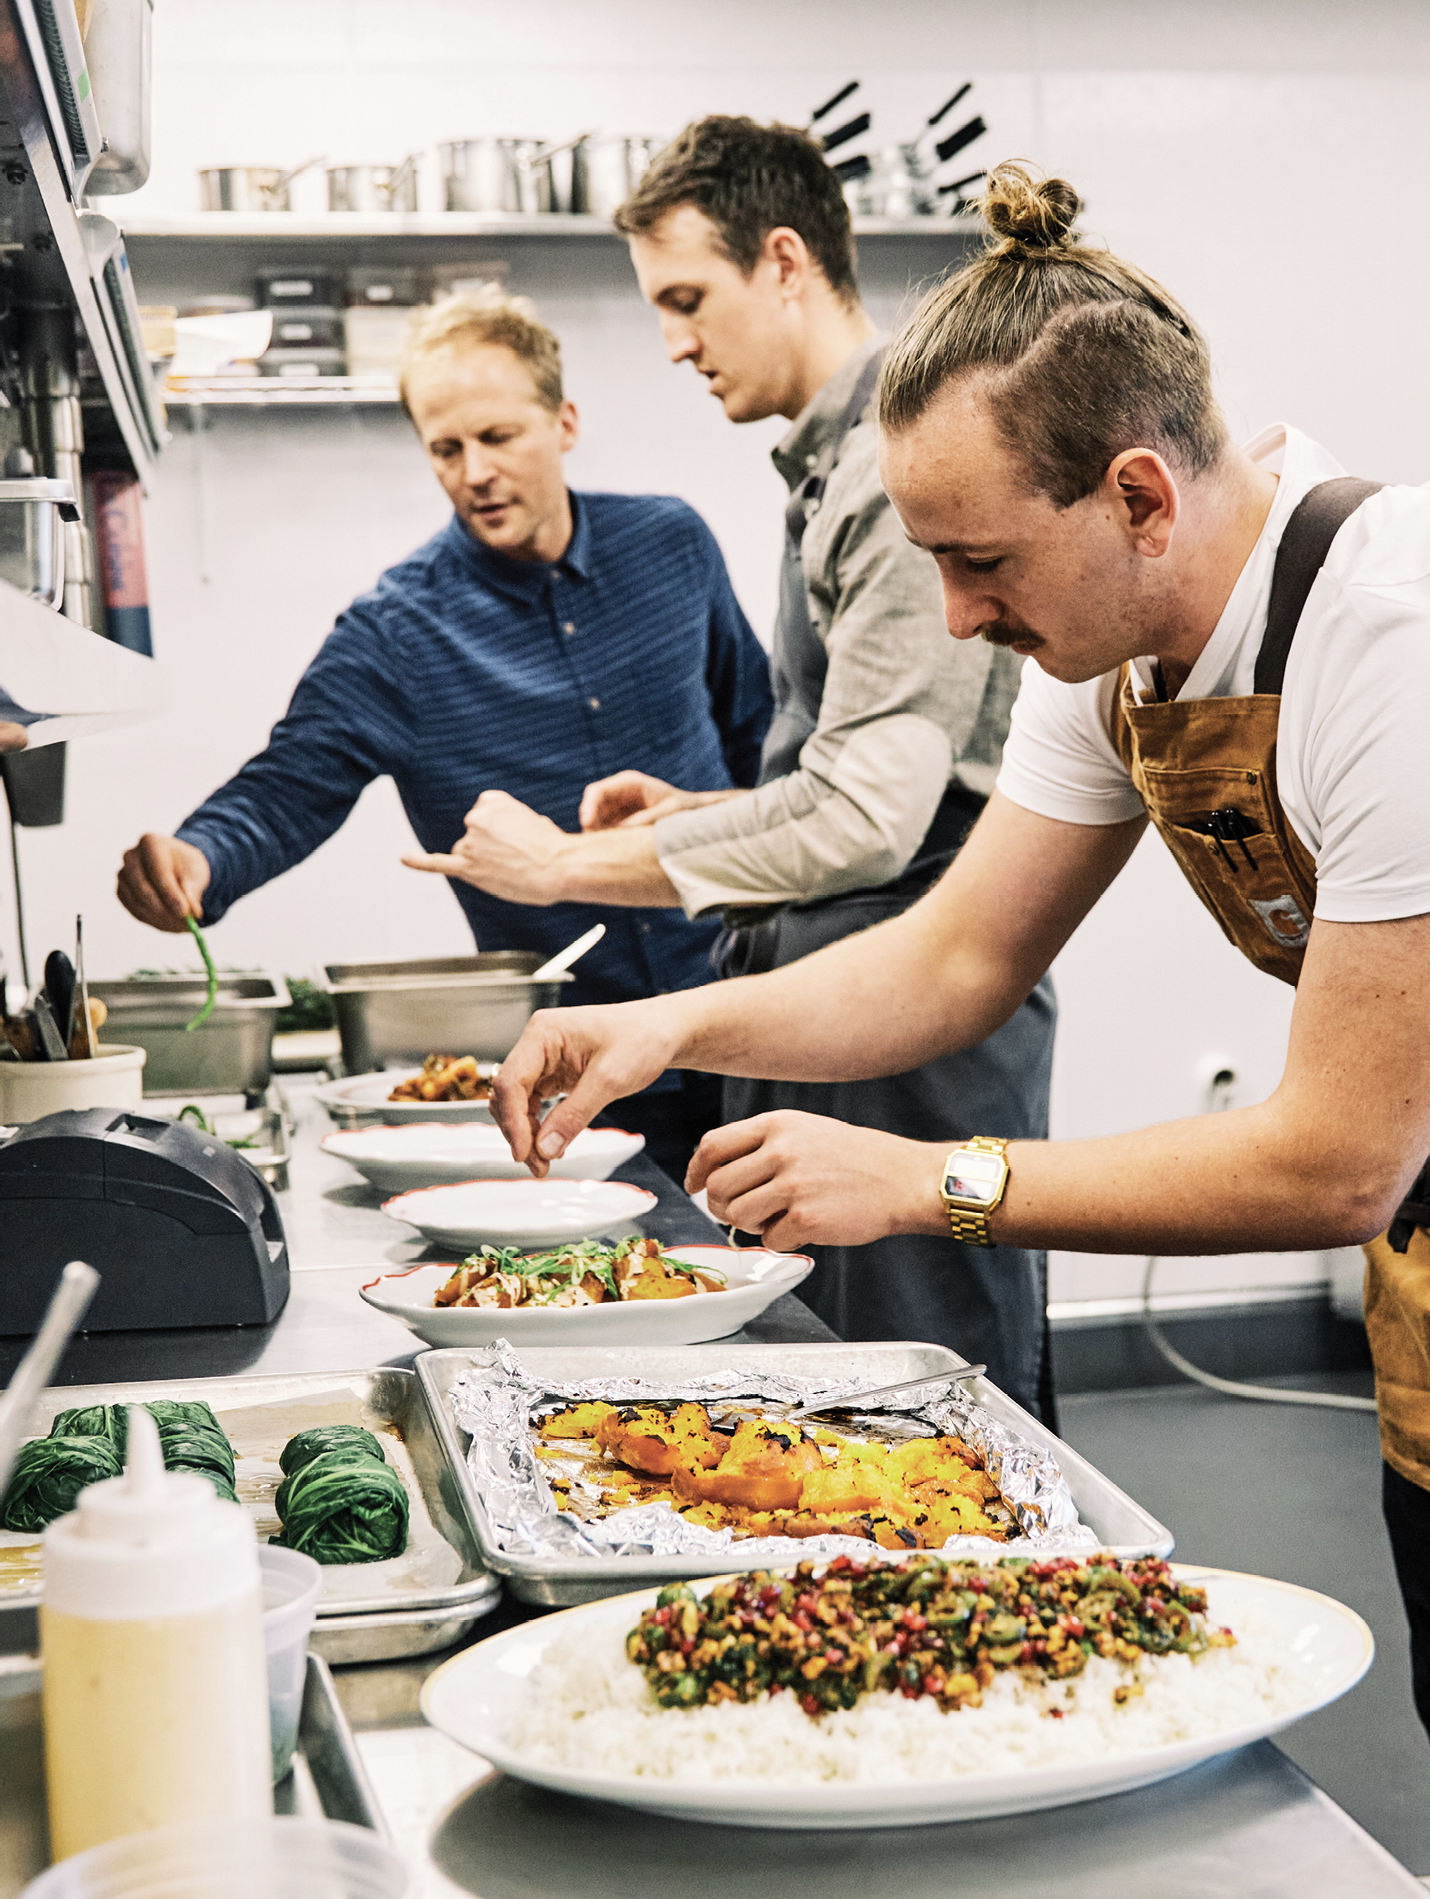 The chefs at Basic Kitchen (Charles Layton, right) and Post House (Evan Gaudreau, center) have their own culinary styles, yet both are aligned with Ben’s focus on elevating fresh, wholesome ingredients.